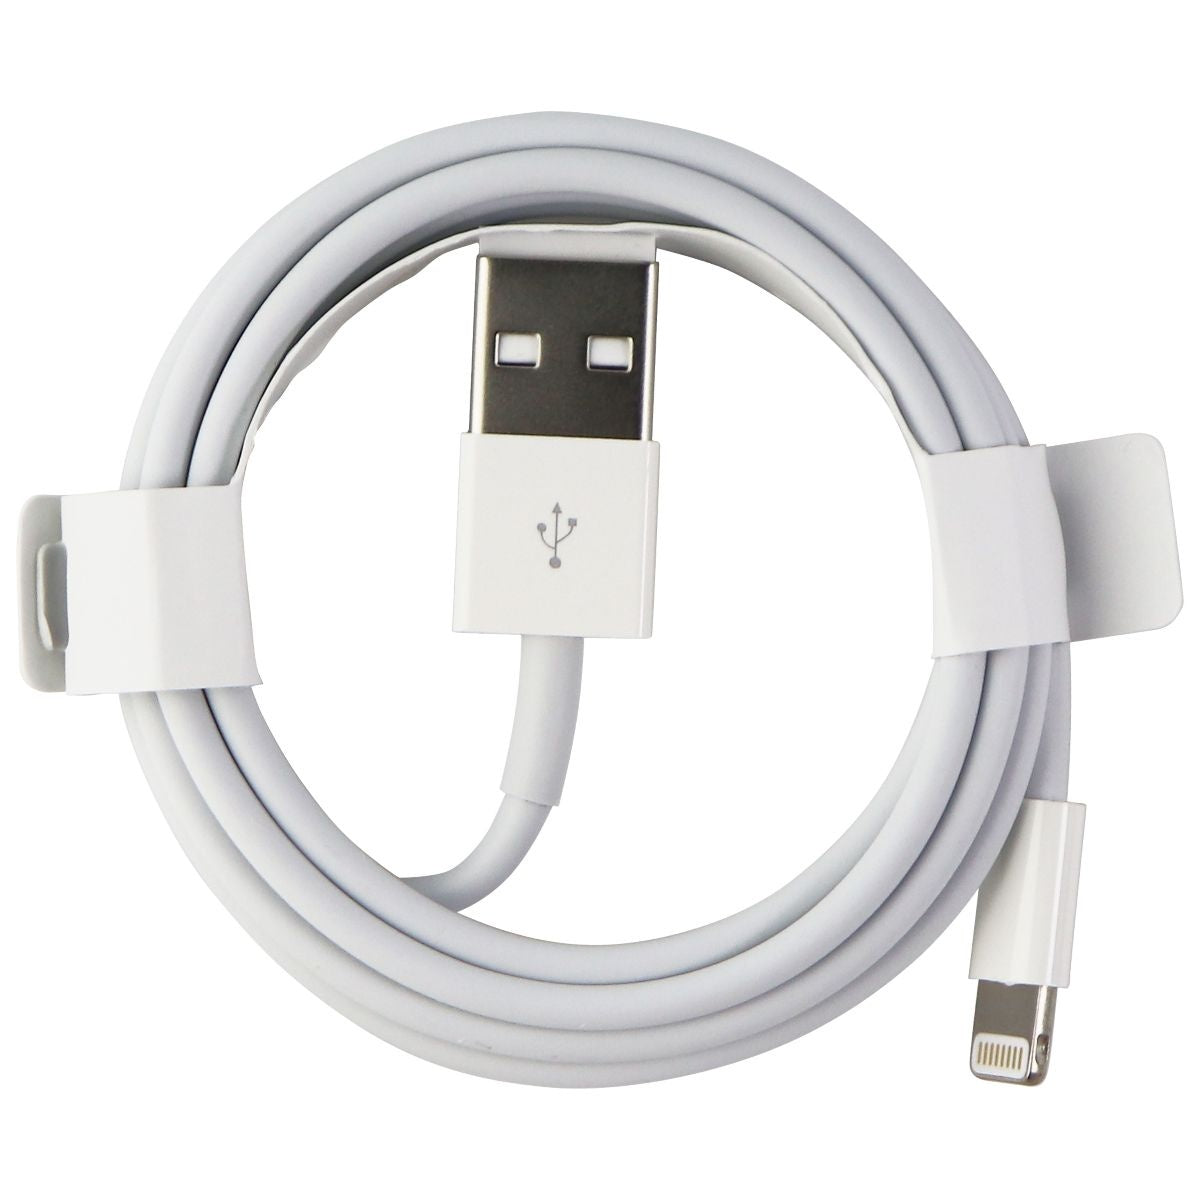 Apple (MD818ZM/A) 3.3Ft USB Cable for iPhones - White